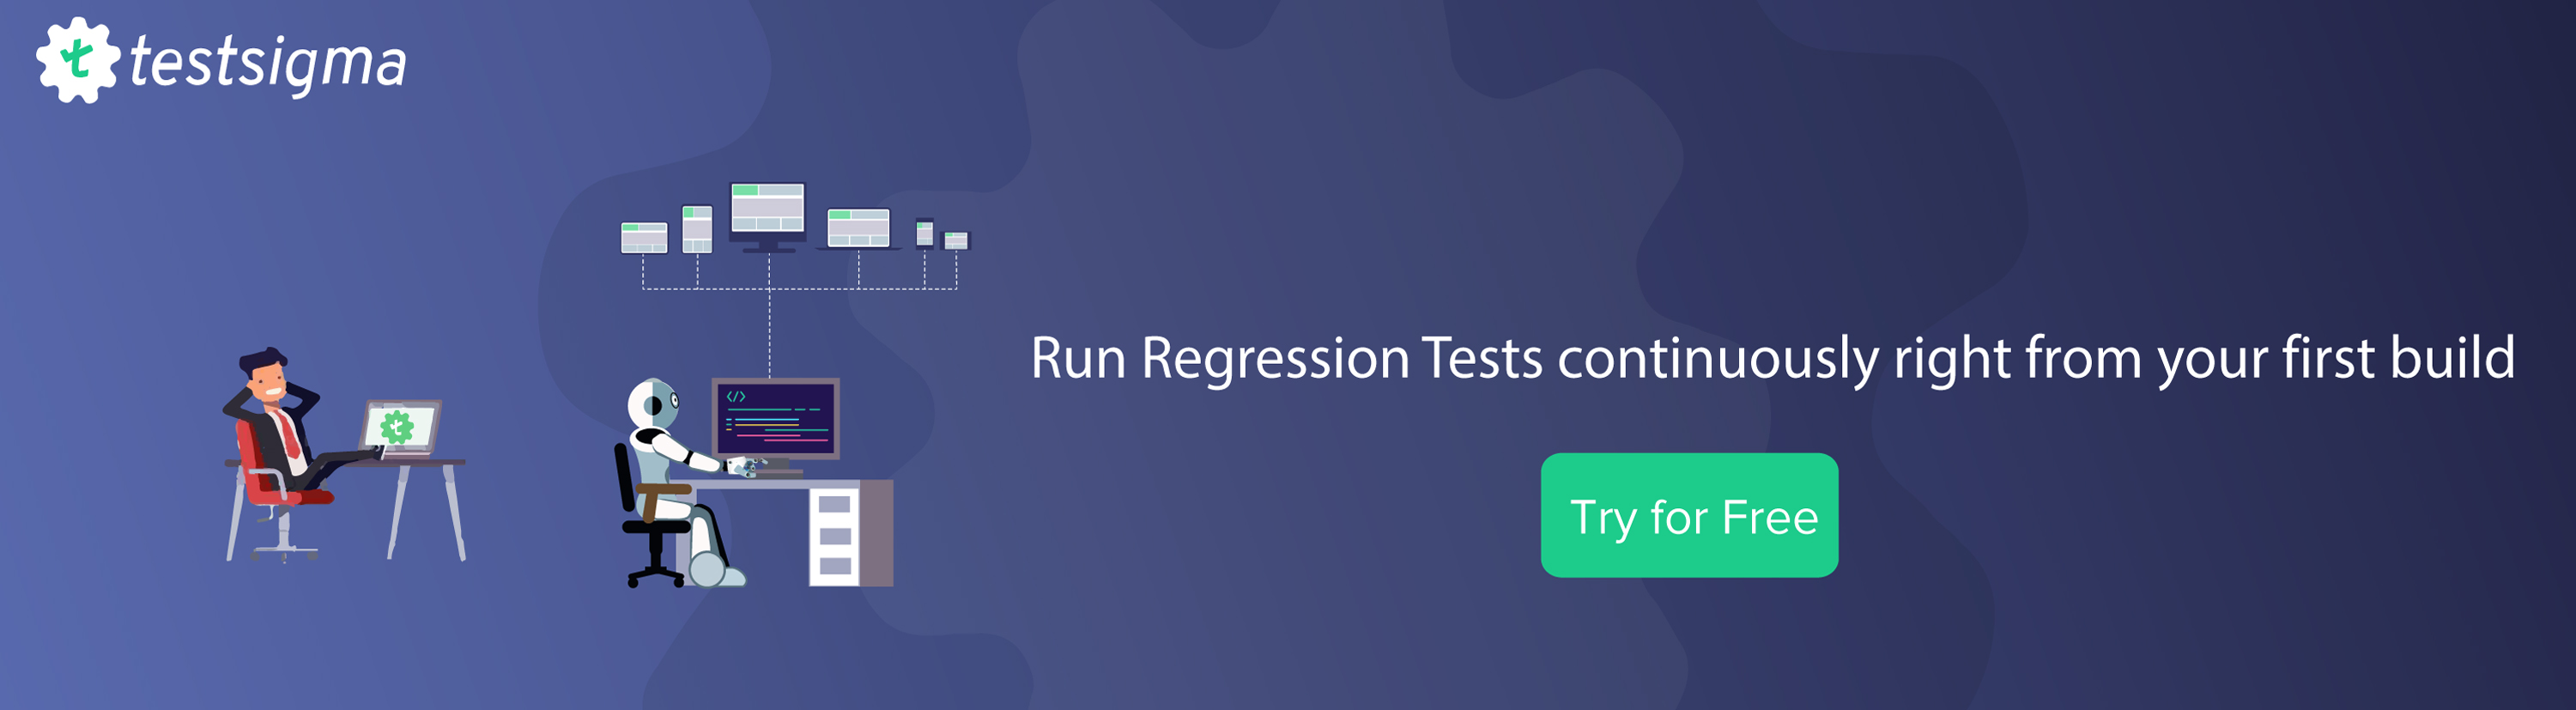 run regression tests continuously with testsigma